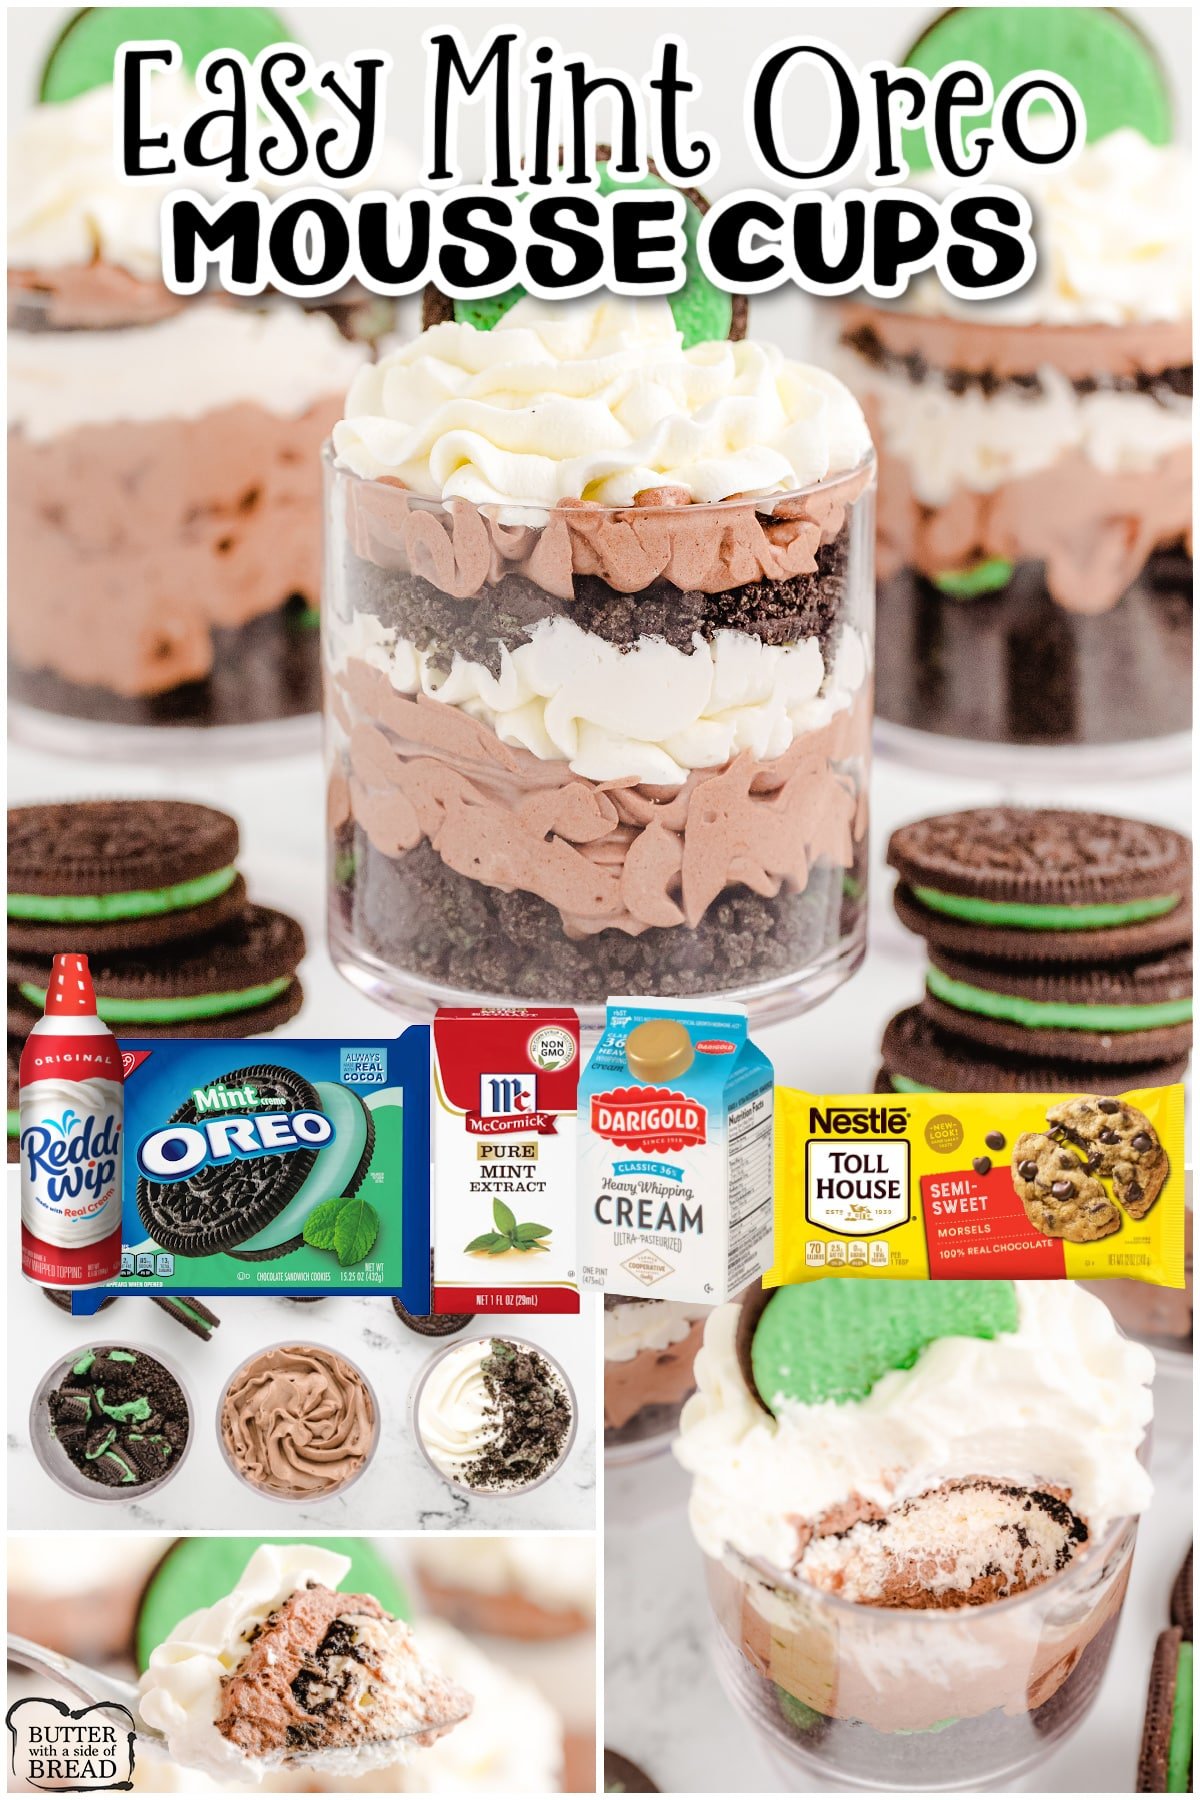 Mint Oreo Chocolate Mousse Cups made with just 5 ingredients! Easy dessert with luscious layers of mint chocolate & sweet cream with crunchy bits of mint Oreo cookies in between!